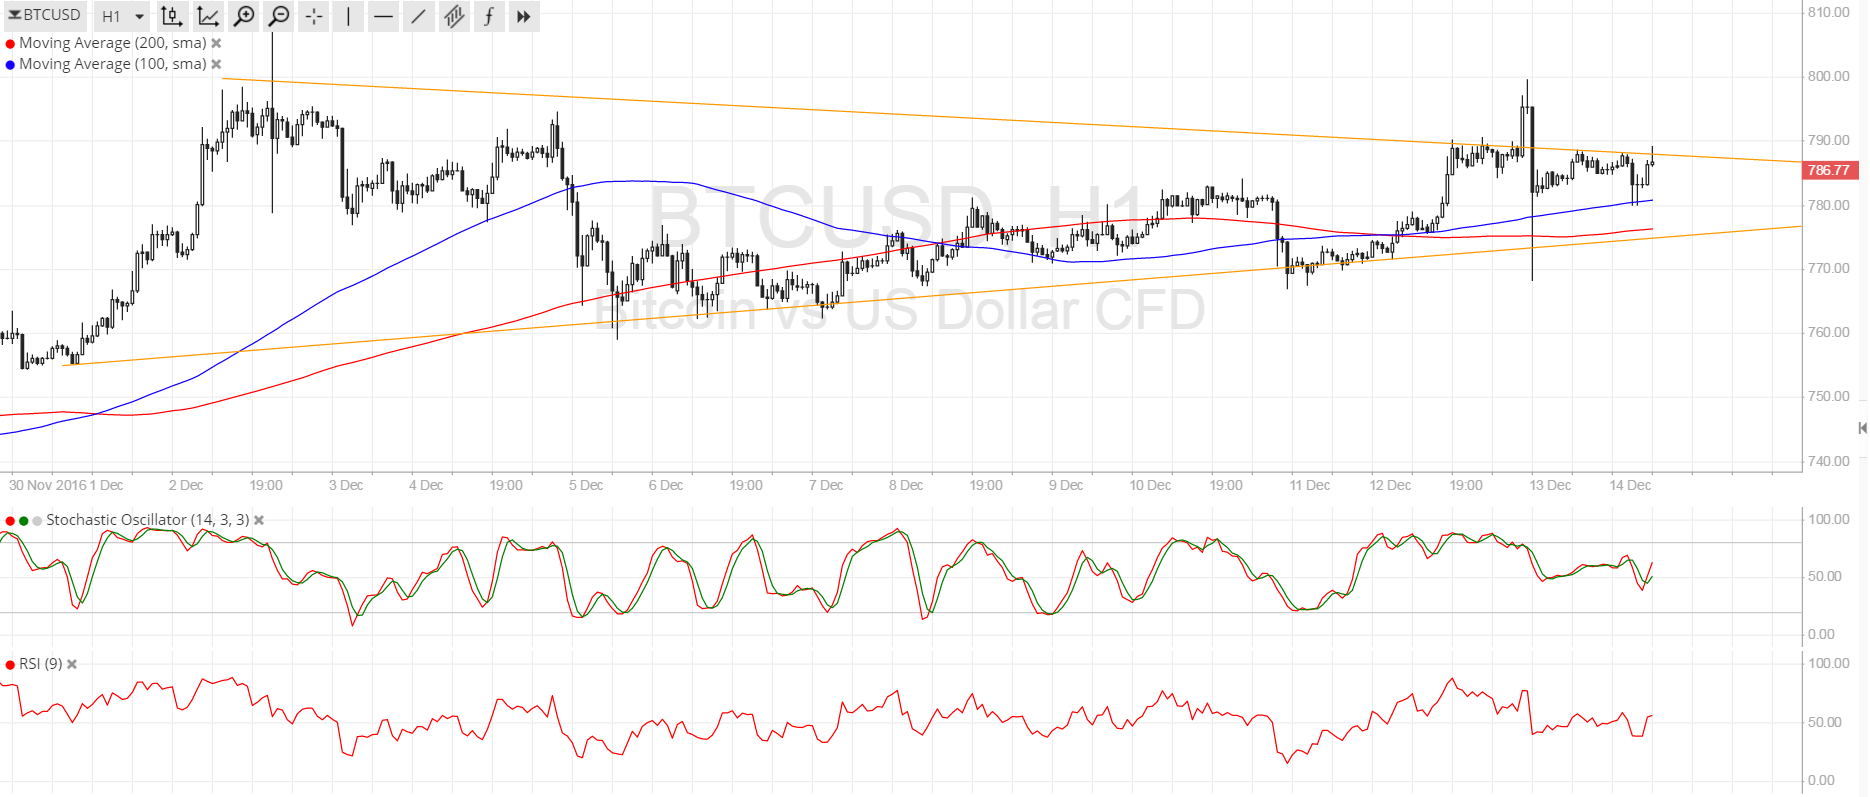 Bitcoin Price Technical Analysis for 12/14/2016 - Was That a Fakeout?